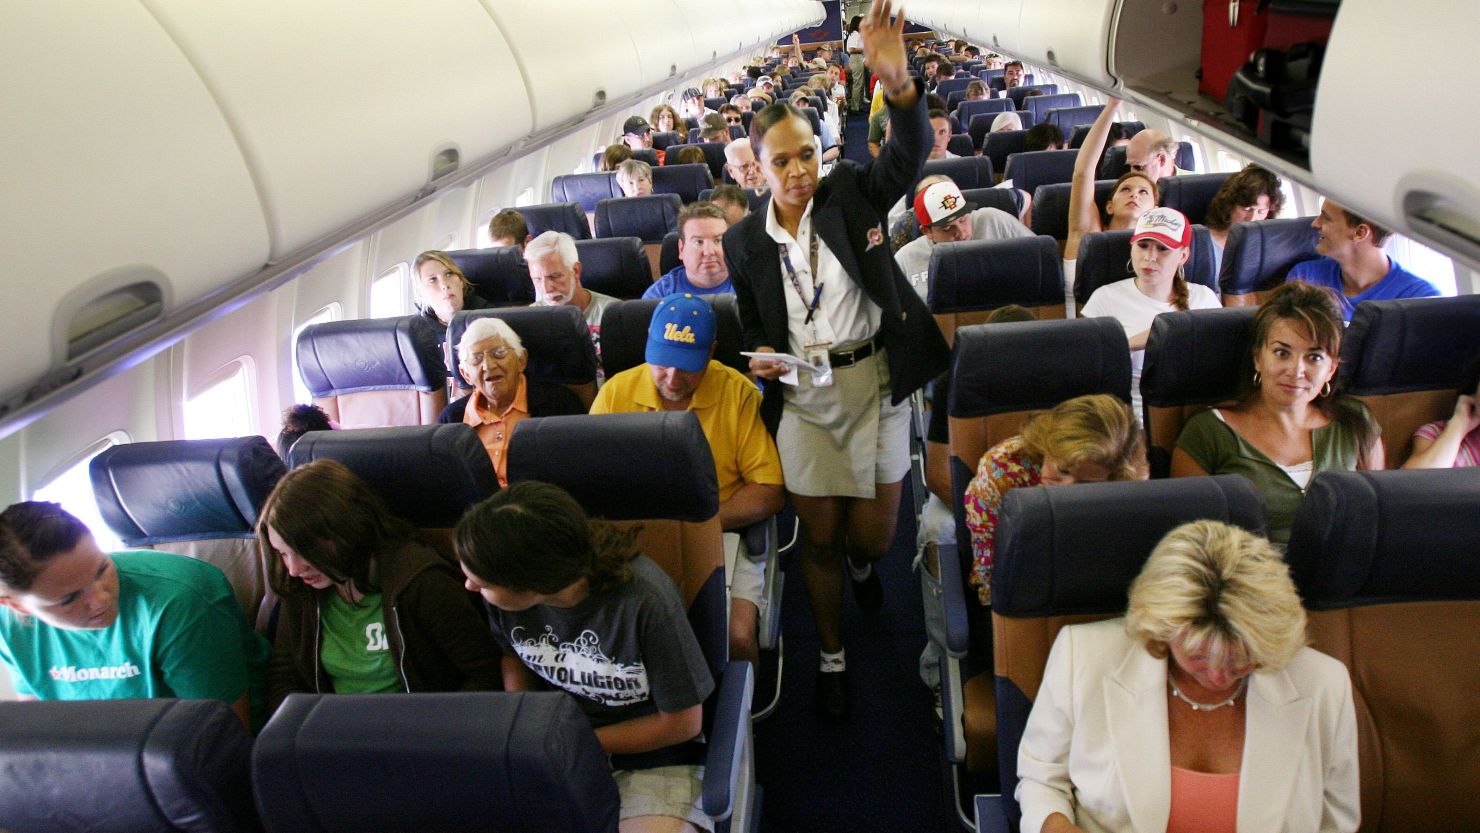 "Spread the seats out, get rid of the flight attendants with an attitude," says a CNN.com commenter.